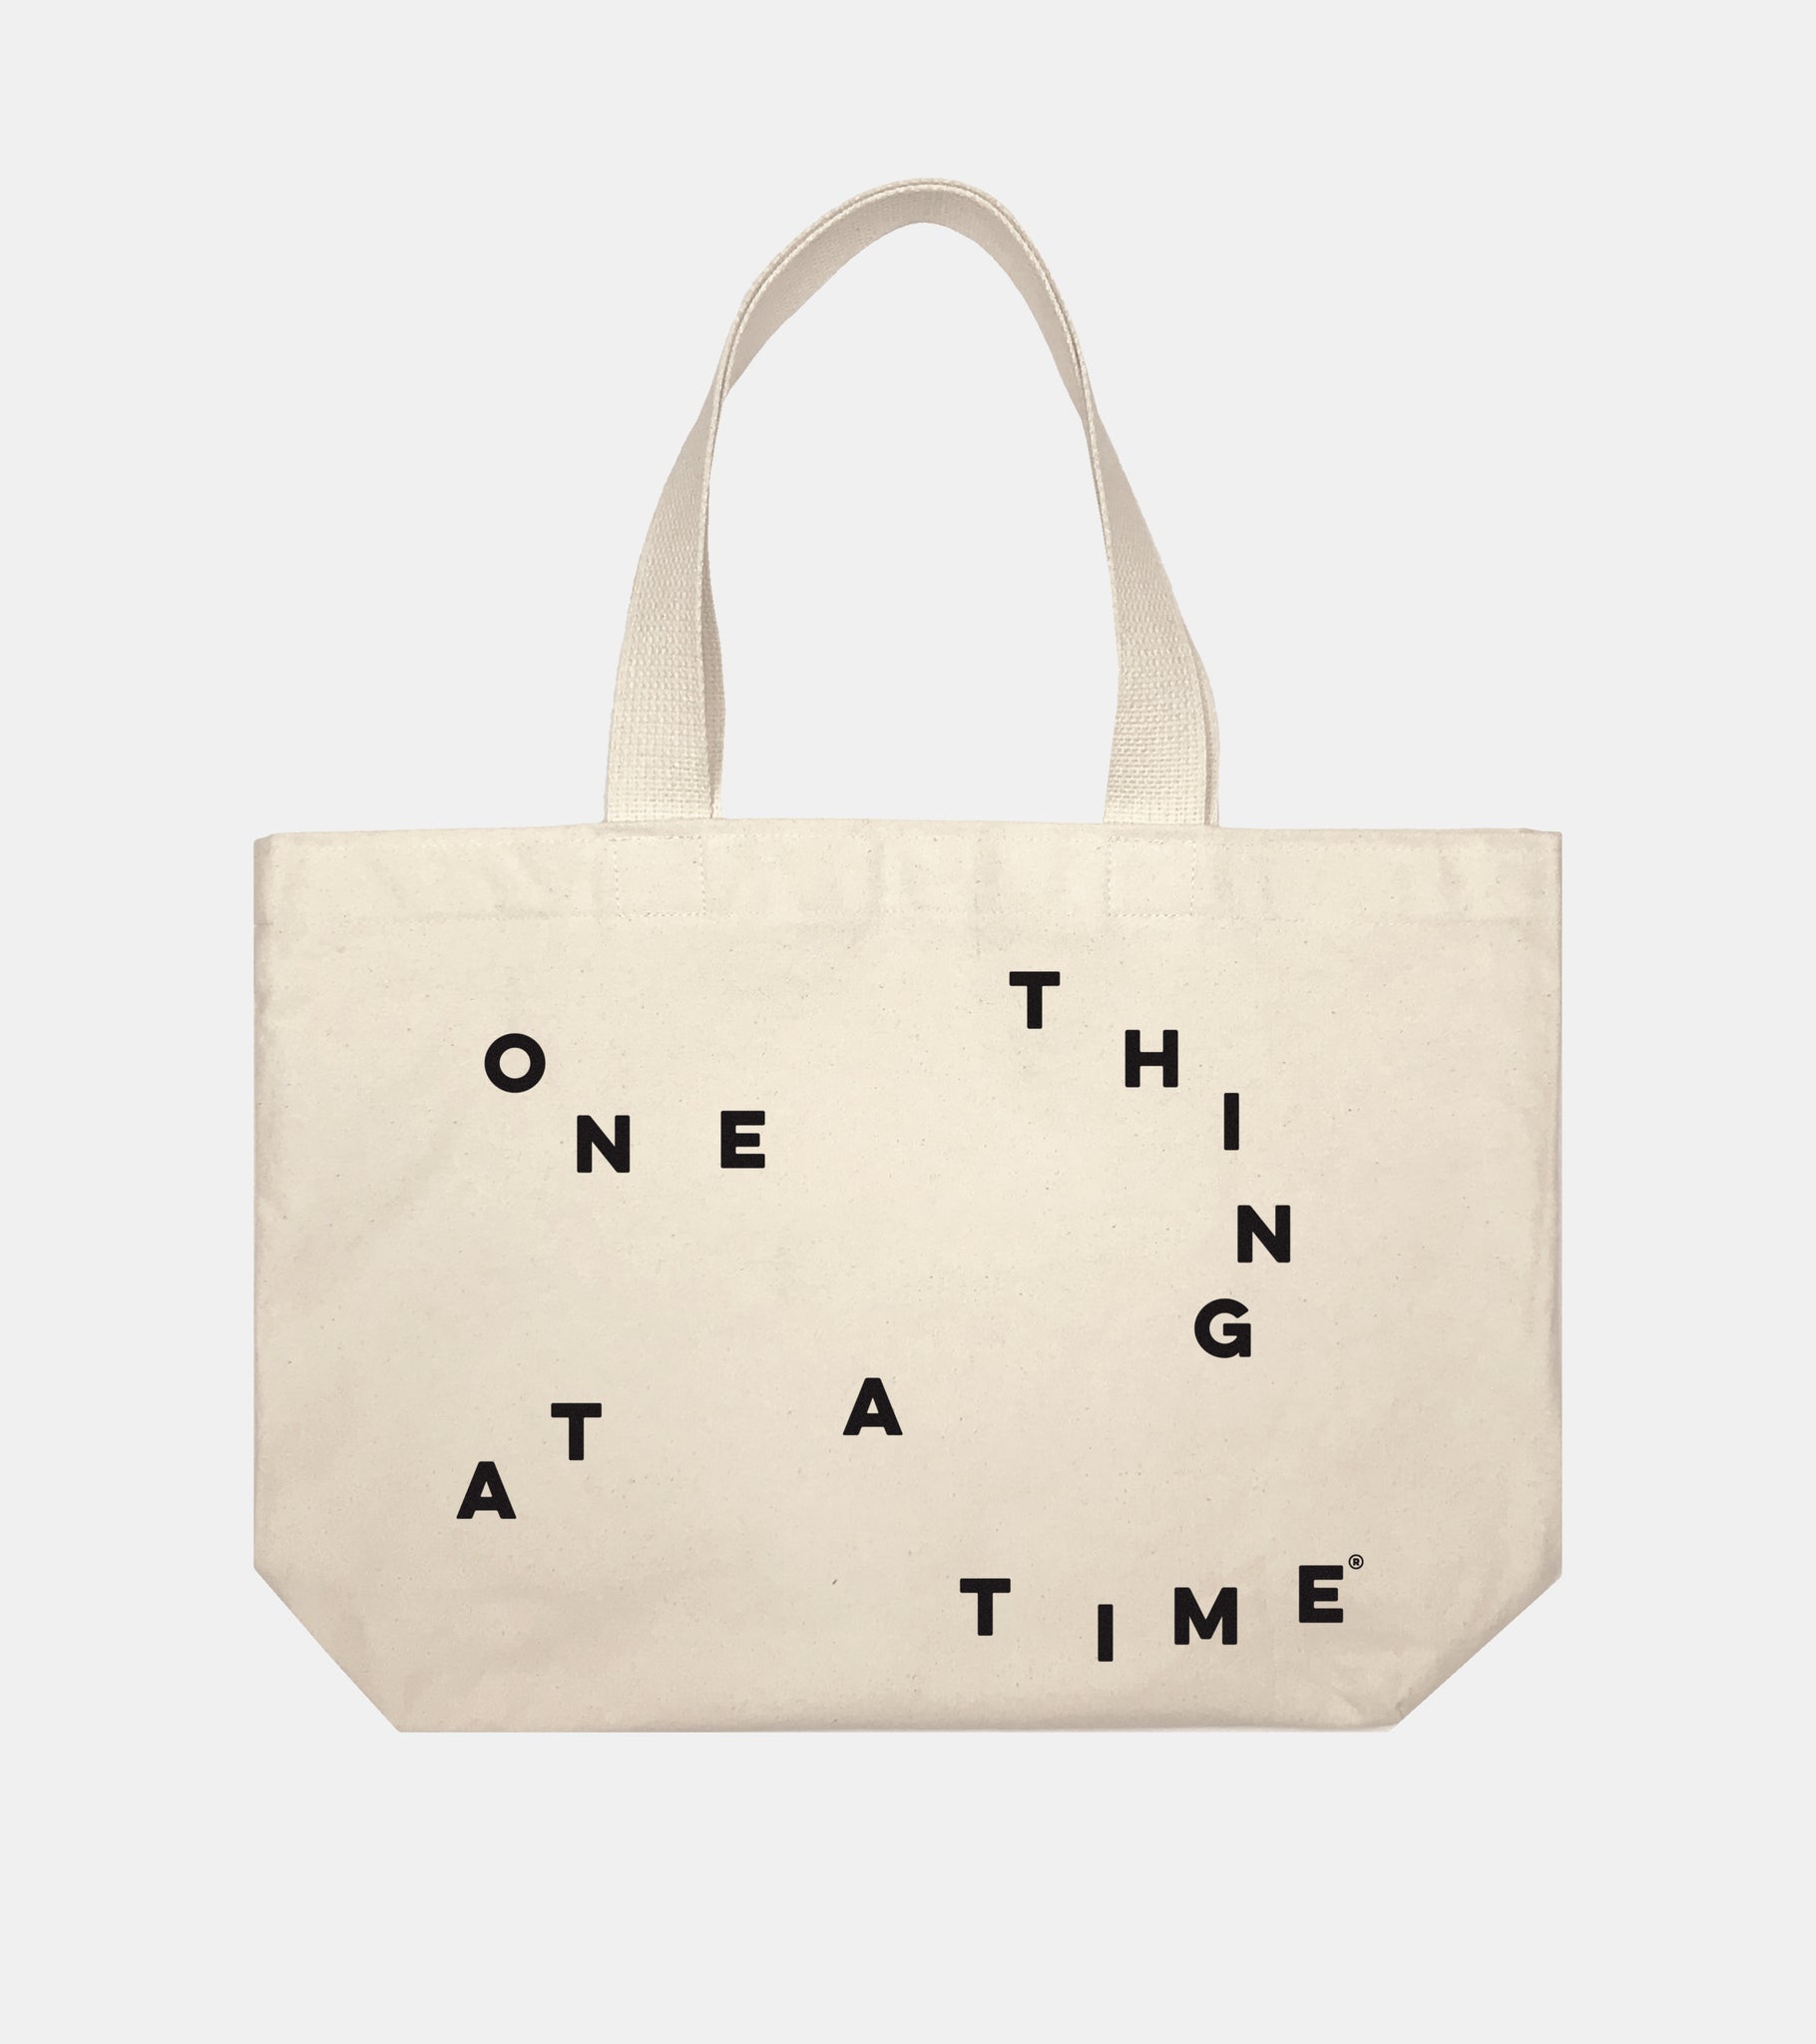 SORRYIMBUSY - One Thing At A Time Heavyweight Tote Bag - Made in USA